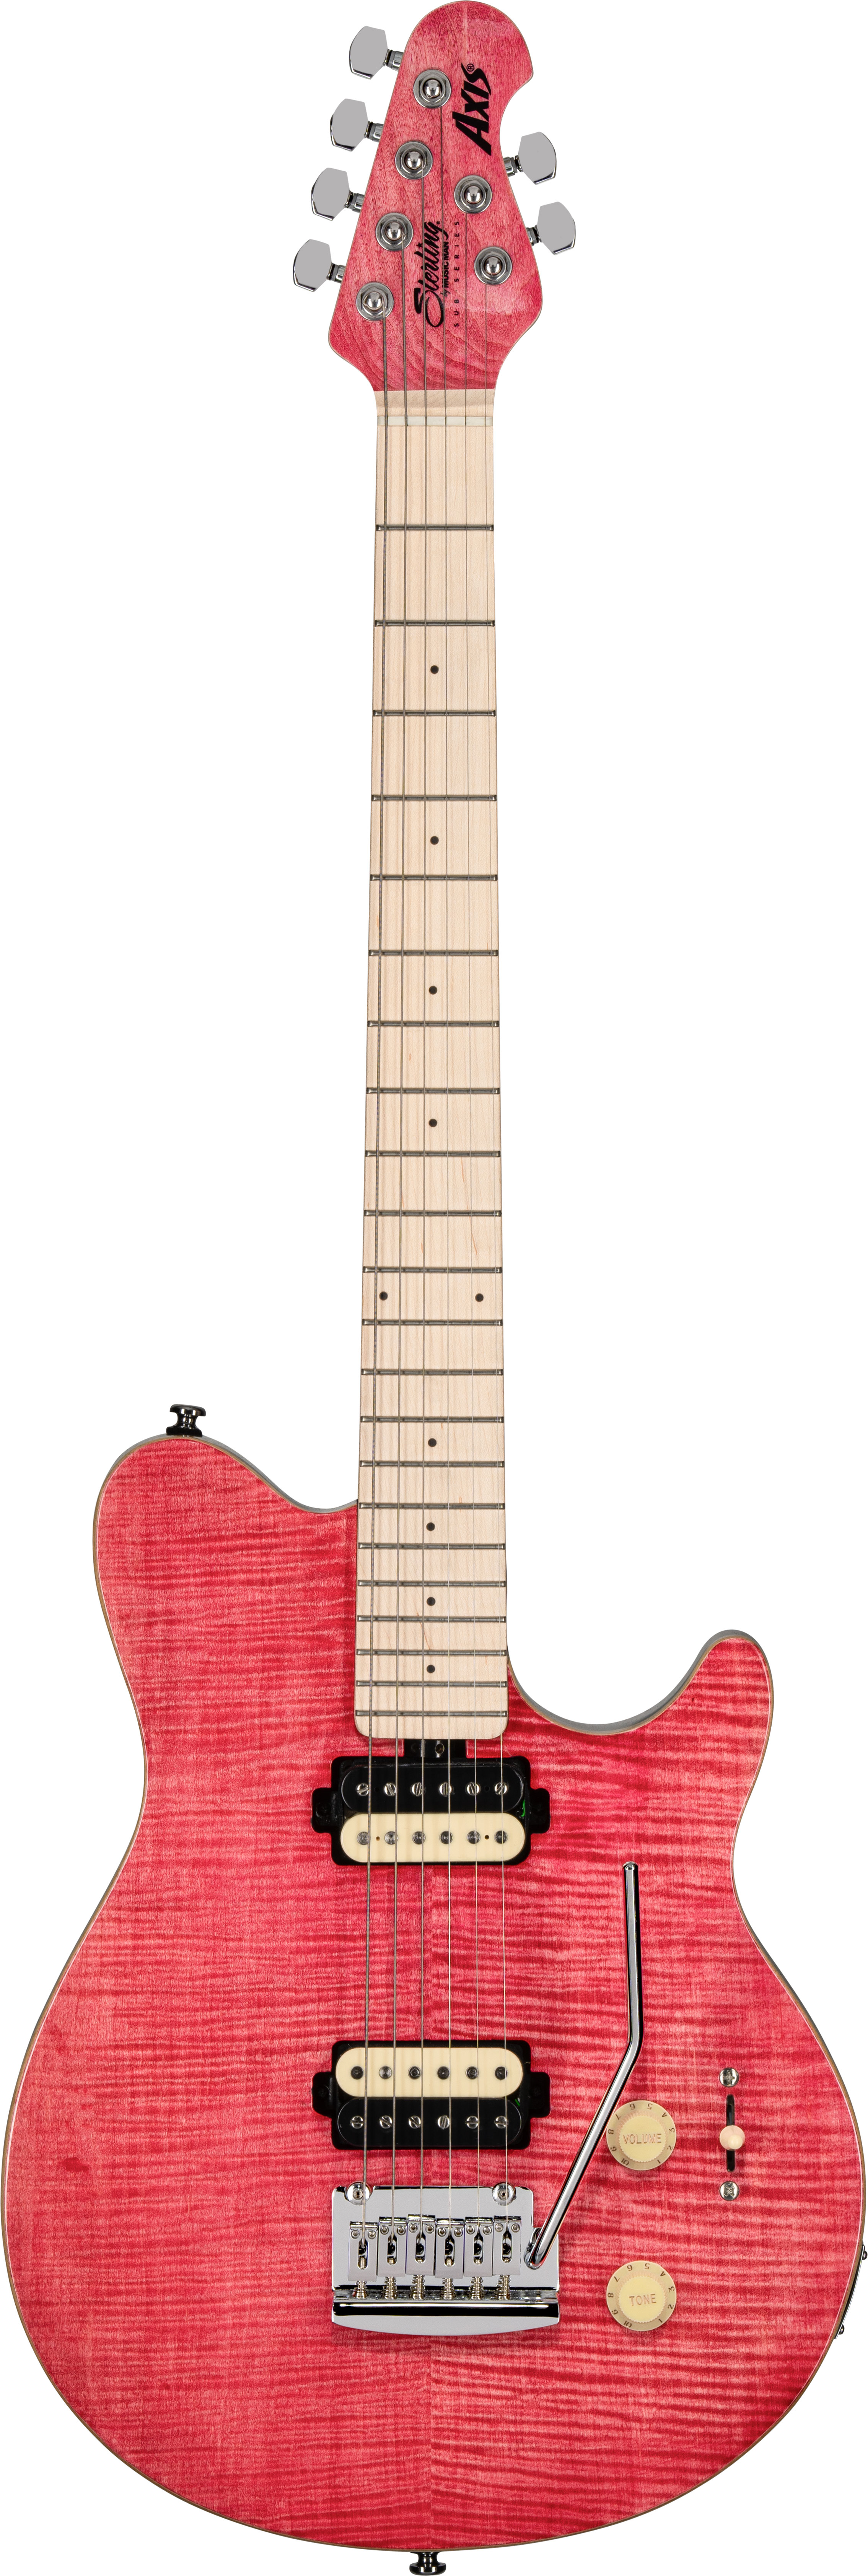 Music Man Sterling SUB Axis AX3 Flame Maple Stain Pink | guitarguitar